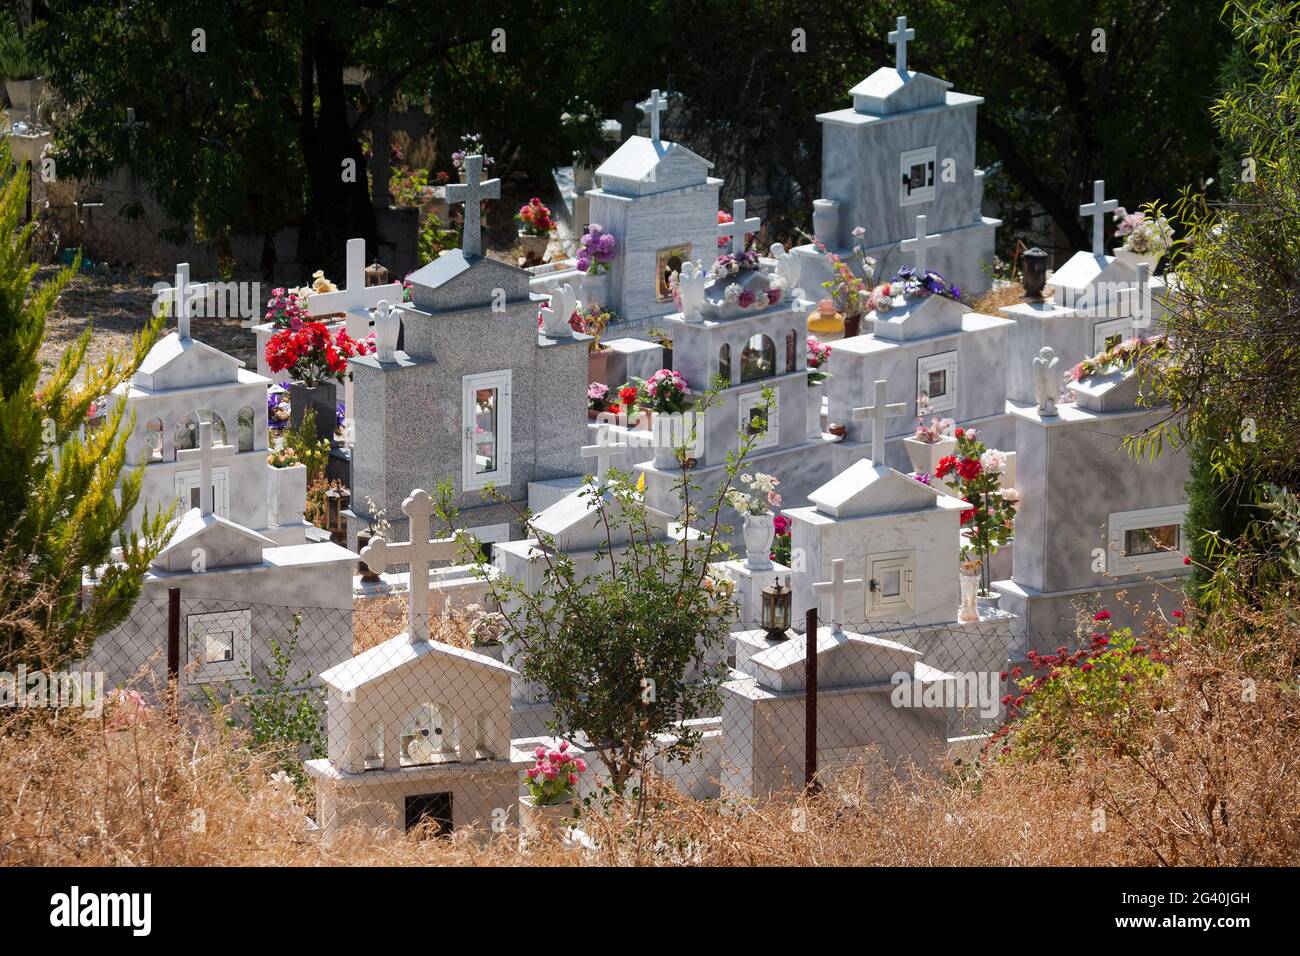 CYPRUS, GREECE/EUROPE - JULY 21 : View of a cemetery in a Cypriot village in Cyprus on July 21, 2009 Stock Photo